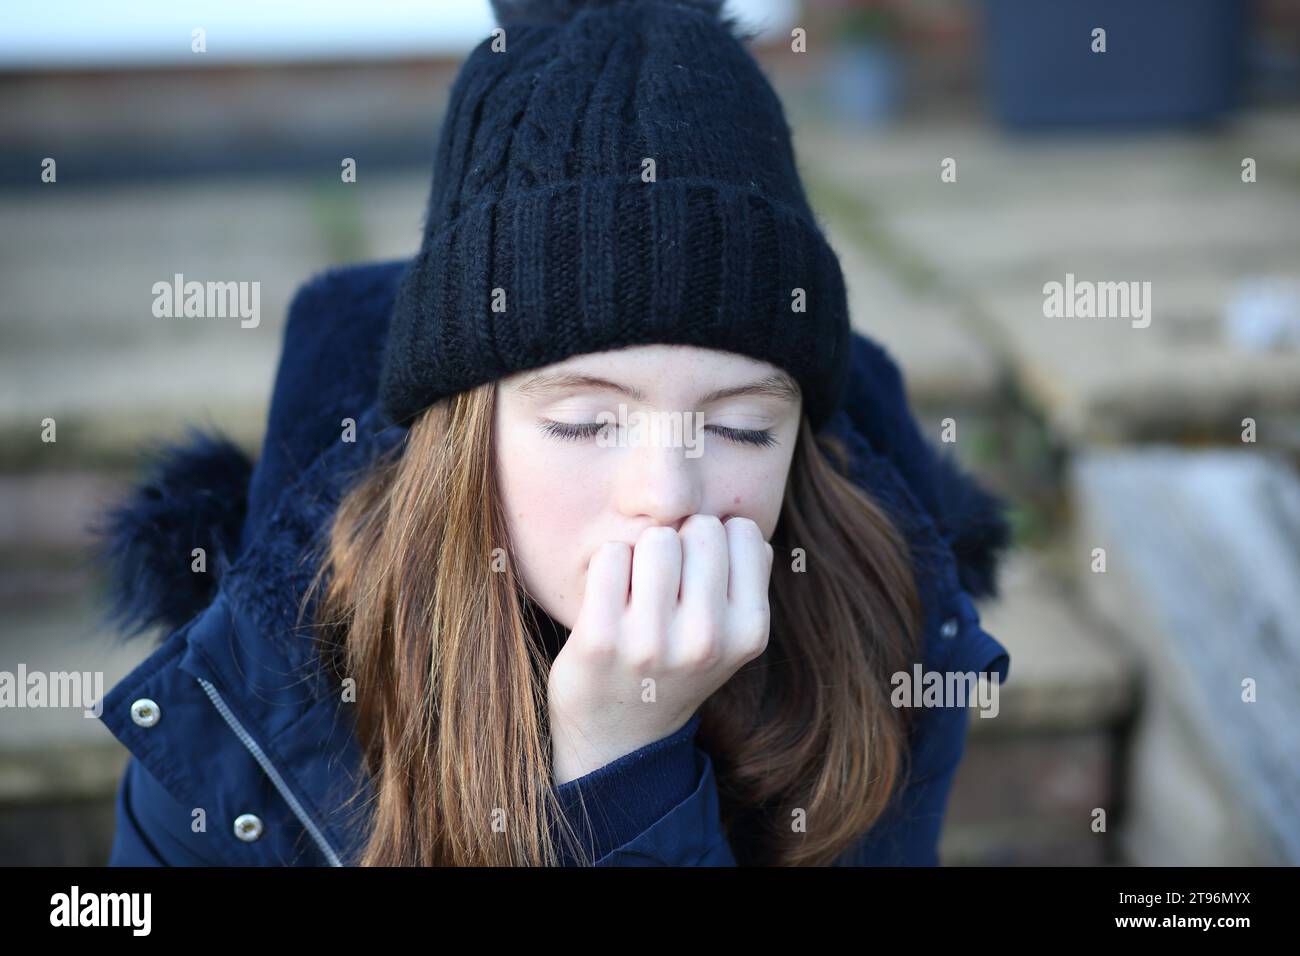 Teen girl sitting on step wearing woolly hat and coat and scarf trying to keep warm with her eyes closed and hand on chin over mouth Stock Photo